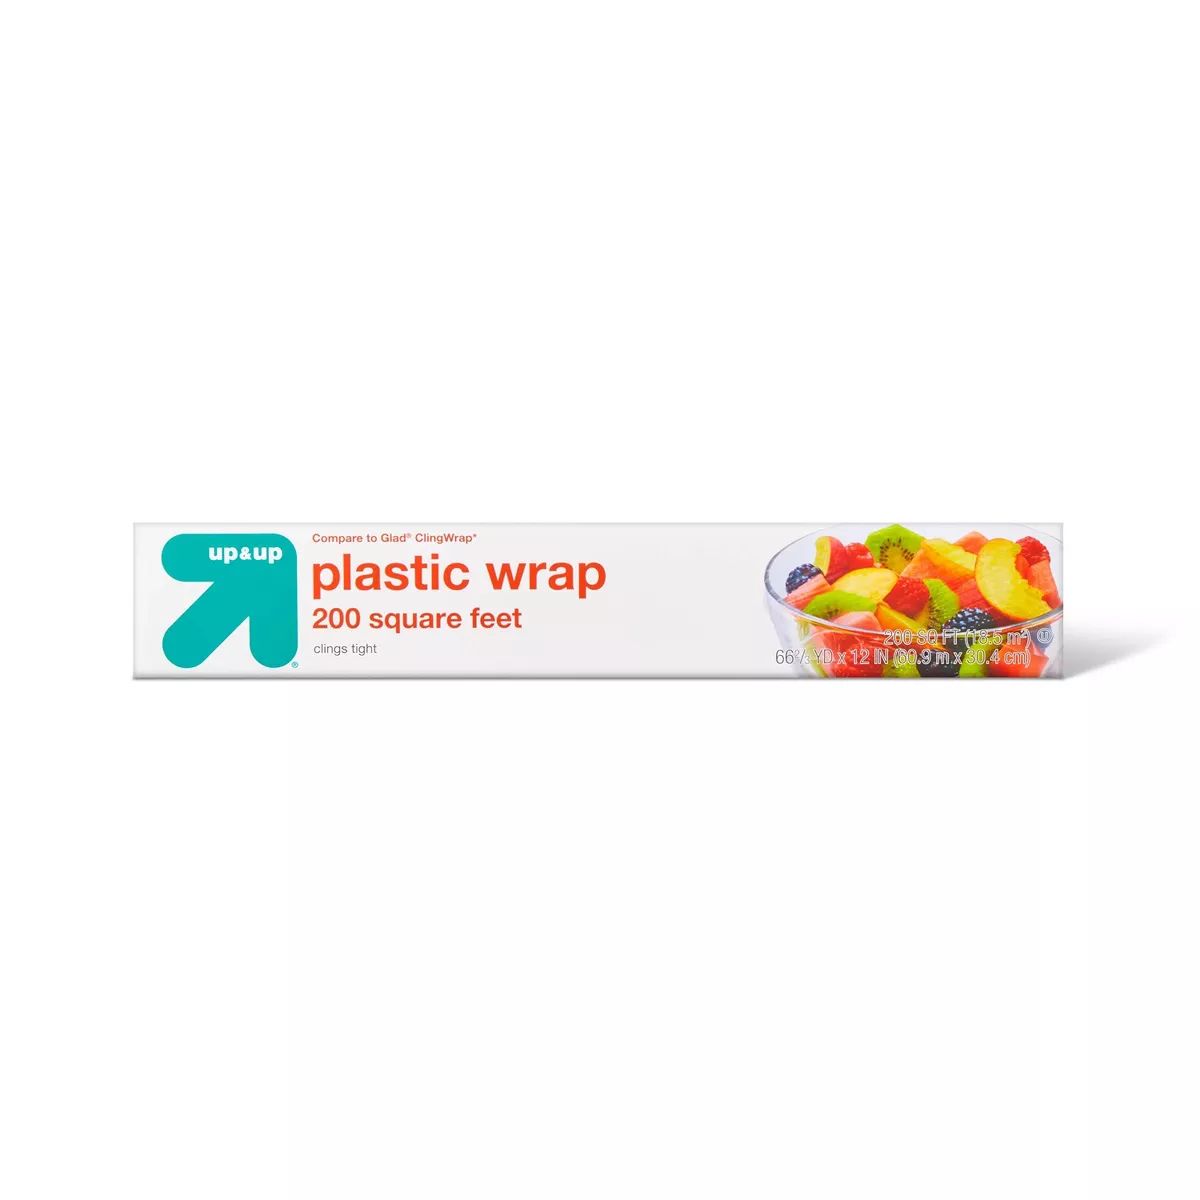 Plastic Wrap - 200 sq ft - up & up™ | Target